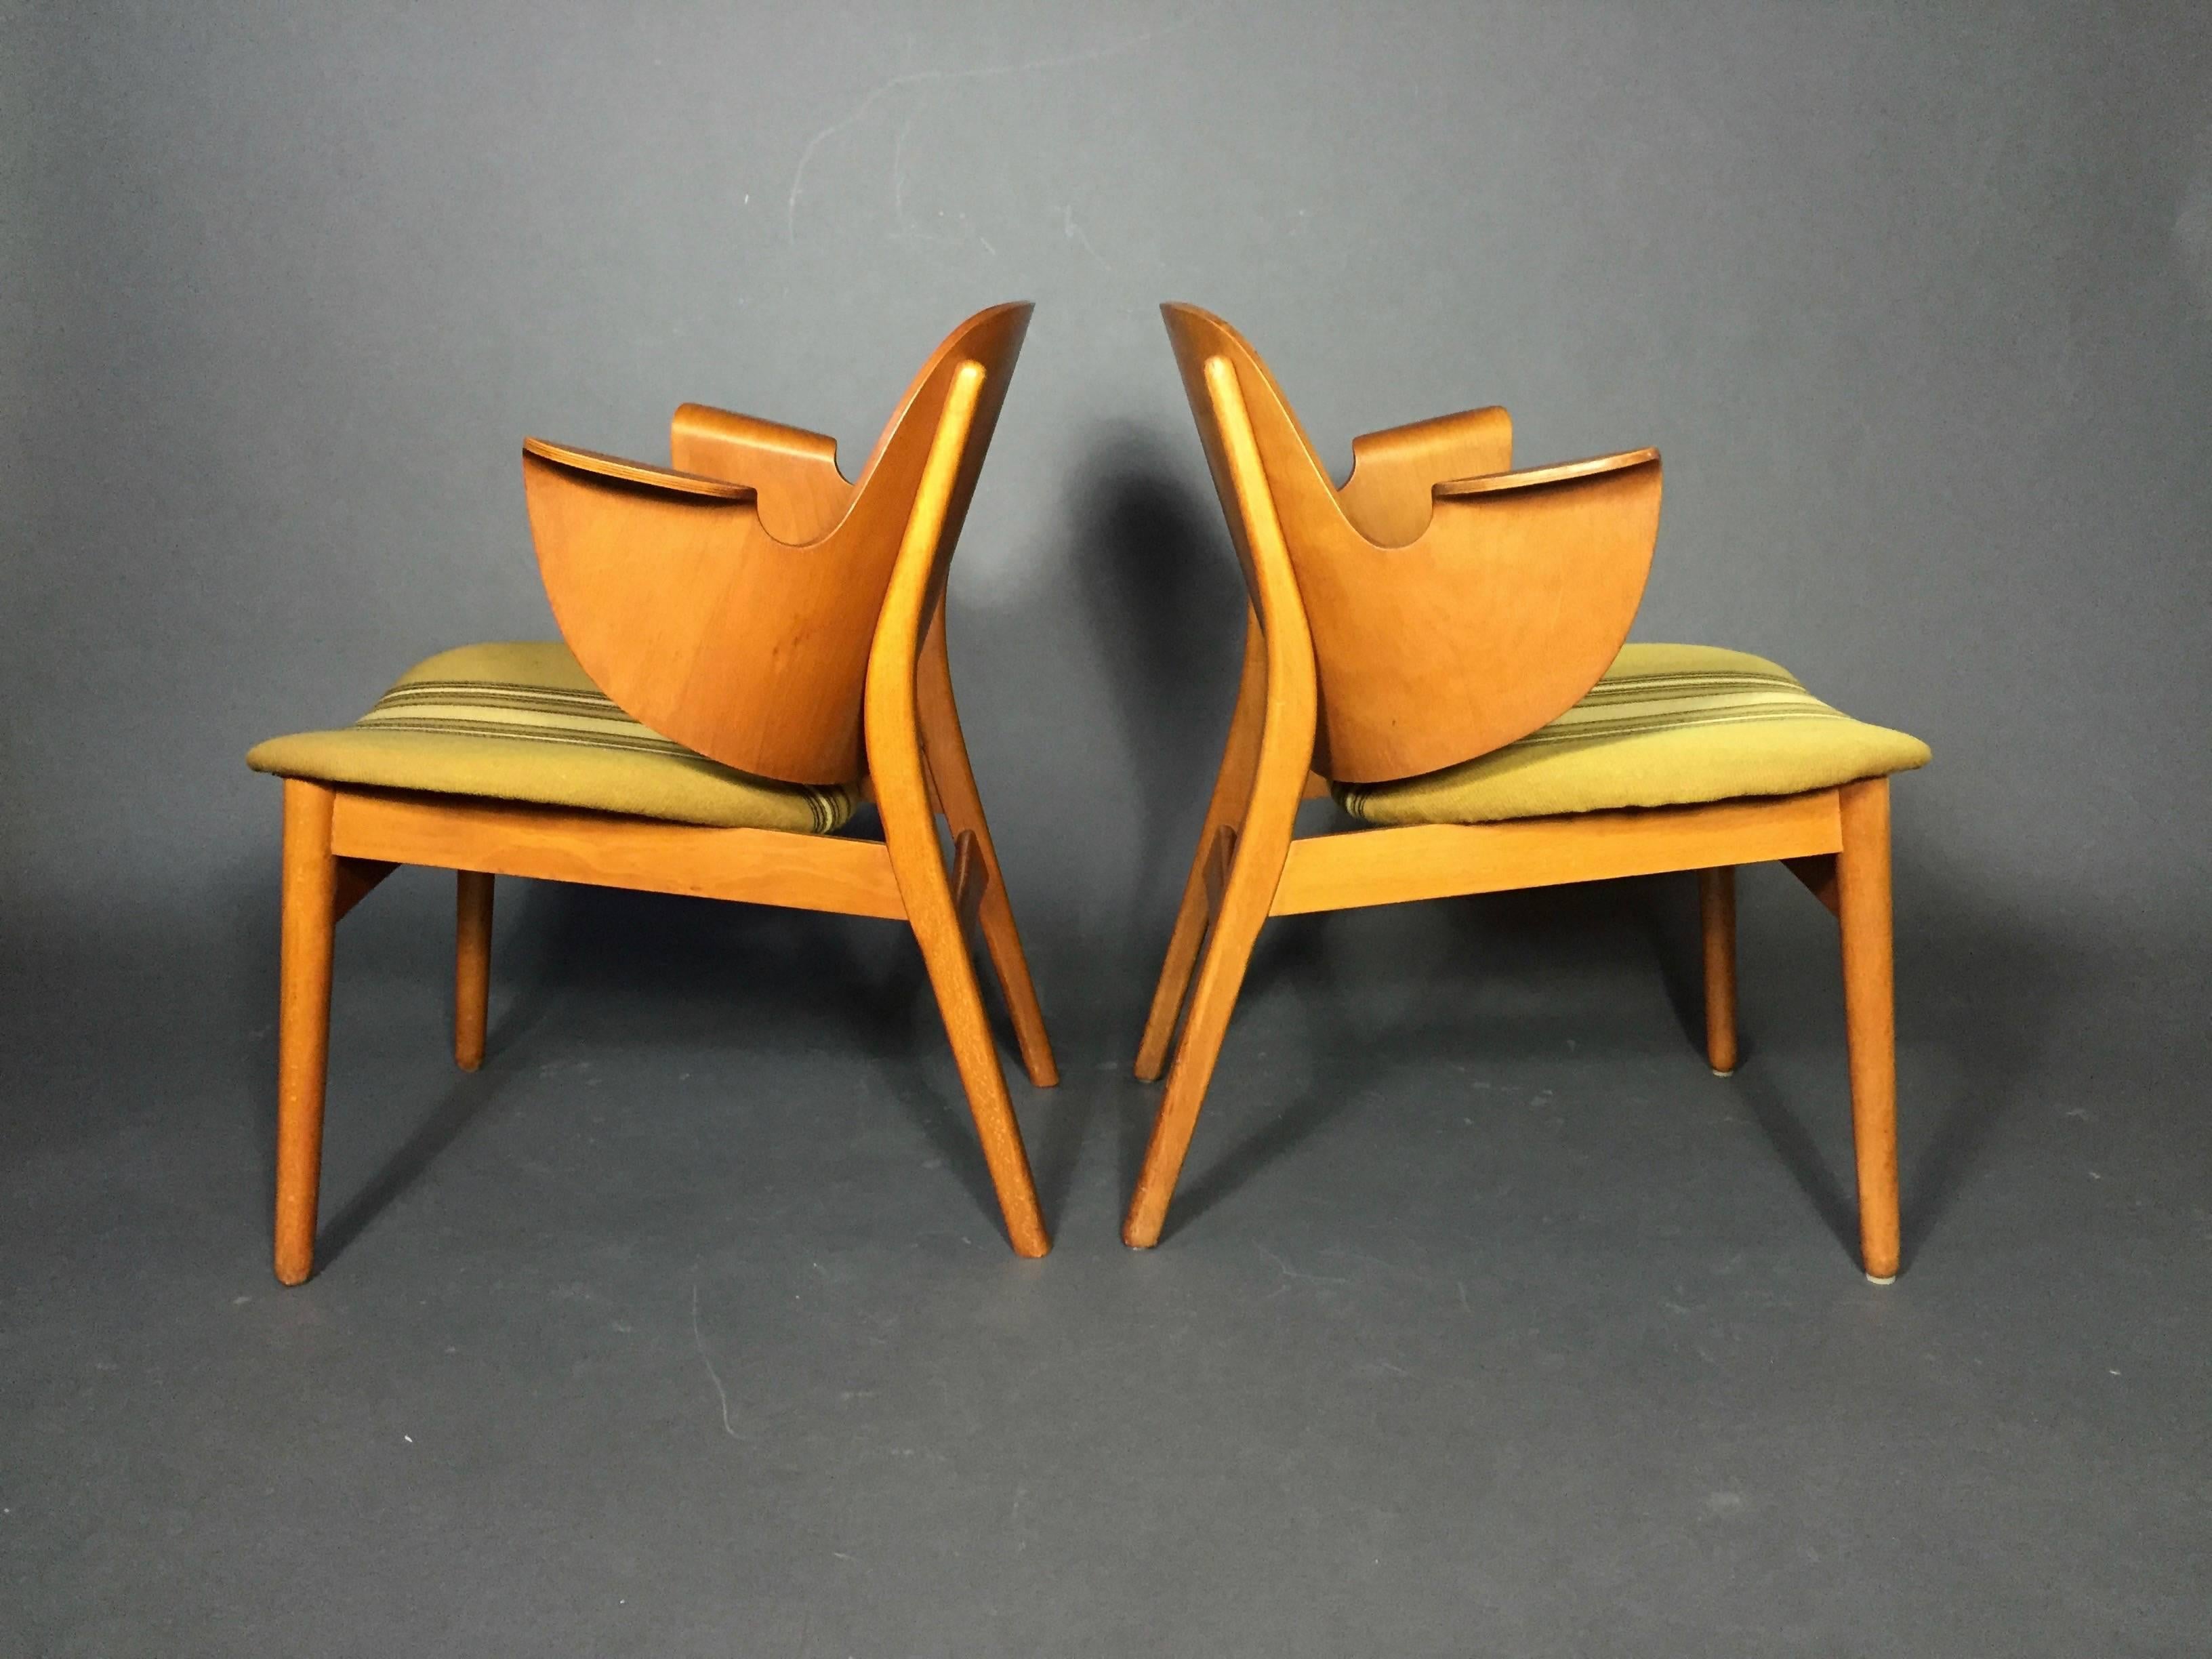 A rare pair of moulded beech armchairs with Classic wool upholstery by Arne Hovmand-Olsen for Bramin/N.A. Jørgensens Møbelfabrik, Denmark, 1950s. Minor chips to veneer at top and normal nicks to legs.